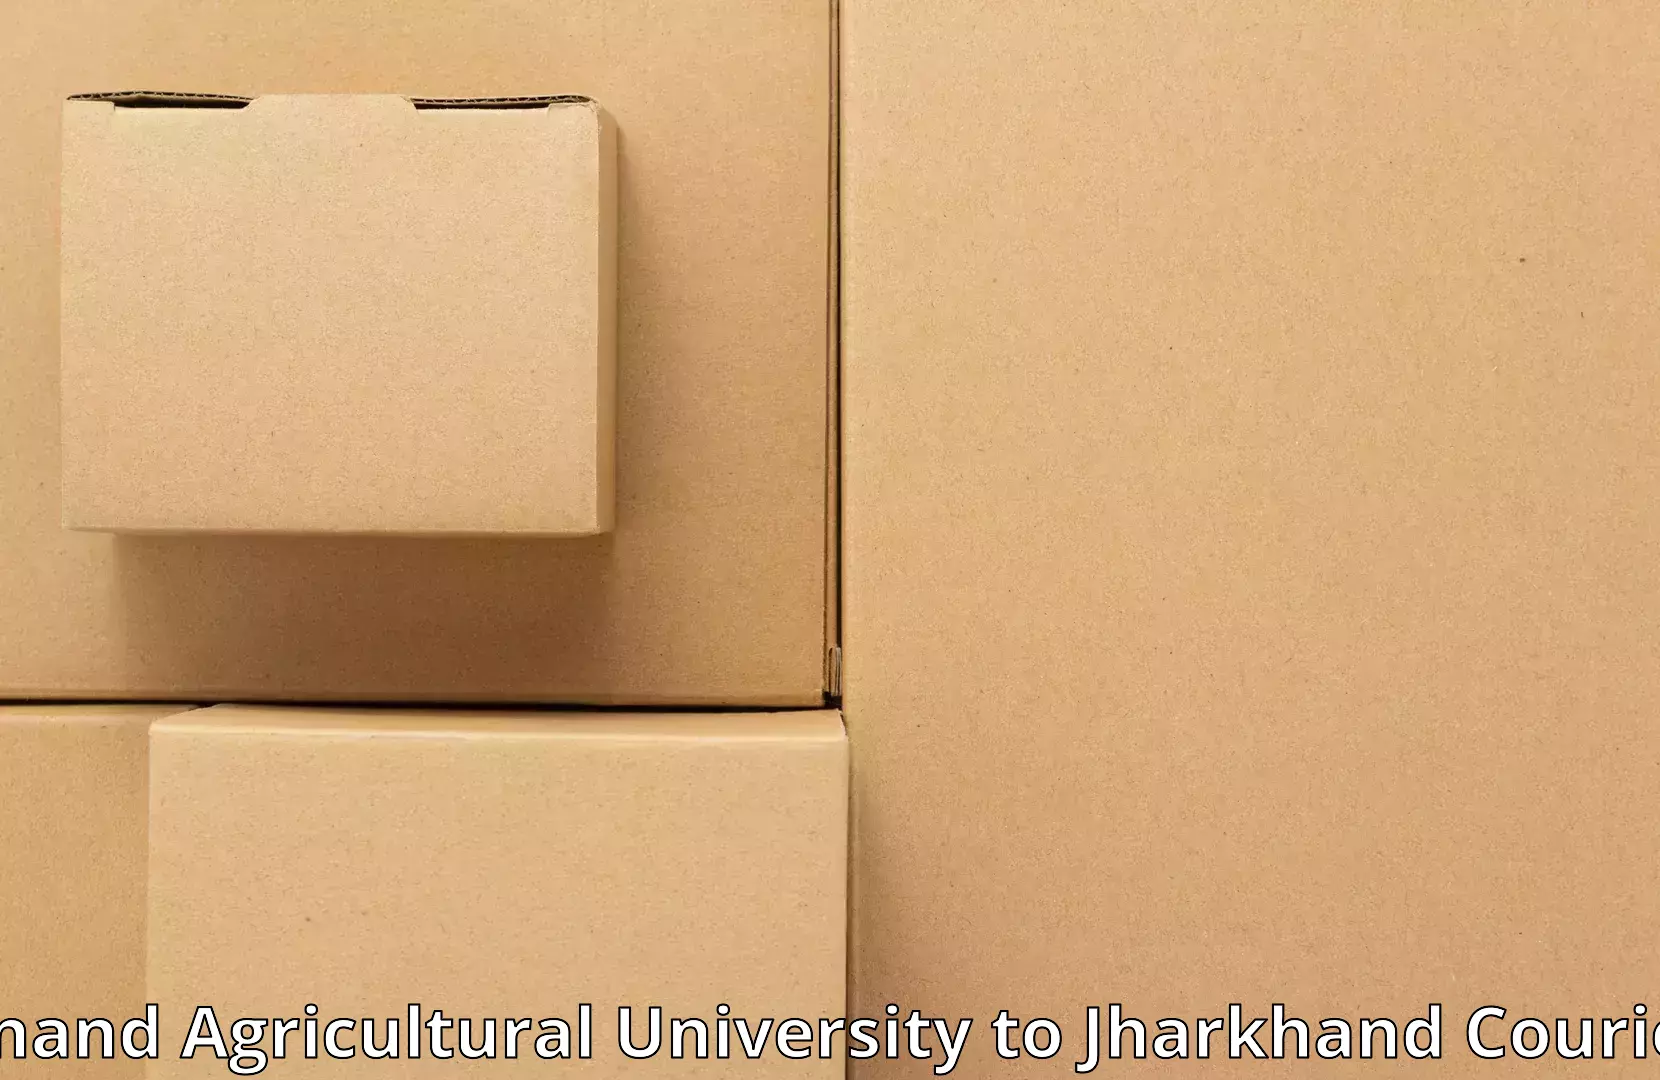 Full-service furniture transport in Anand Agricultural University to Chaibasa